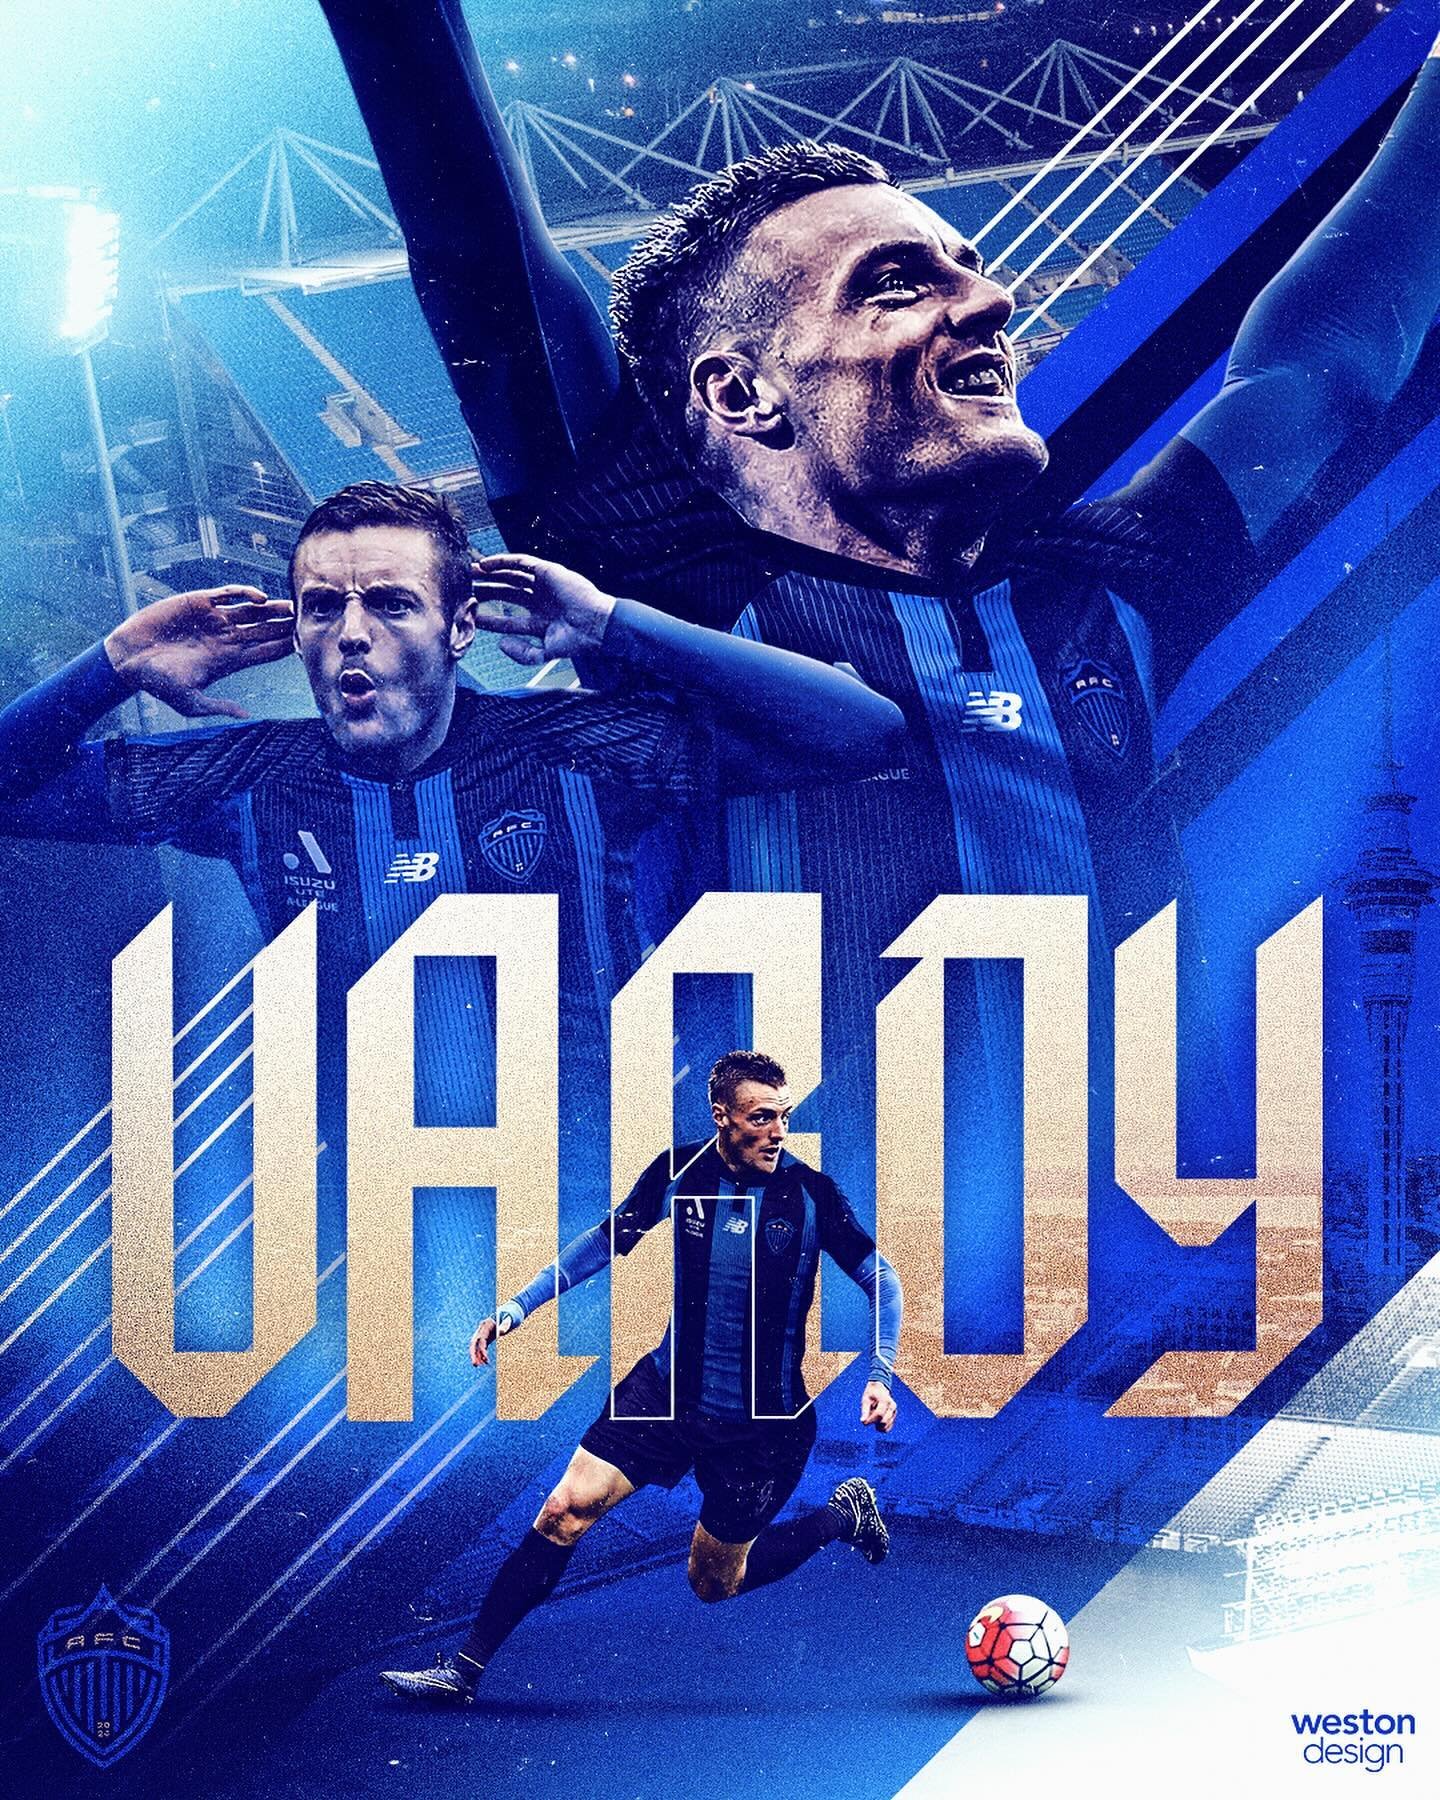 JAMIE VARDY&rsquo;S HAVING A PARTY!! 🎉

But is it going to be in Auckland..? 👀

With @aucklandfc_24 officially joining the @aleagues and transfer rumours SWIRLING around left right and centre - it&rsquo;s hard to not get excited about potential mar